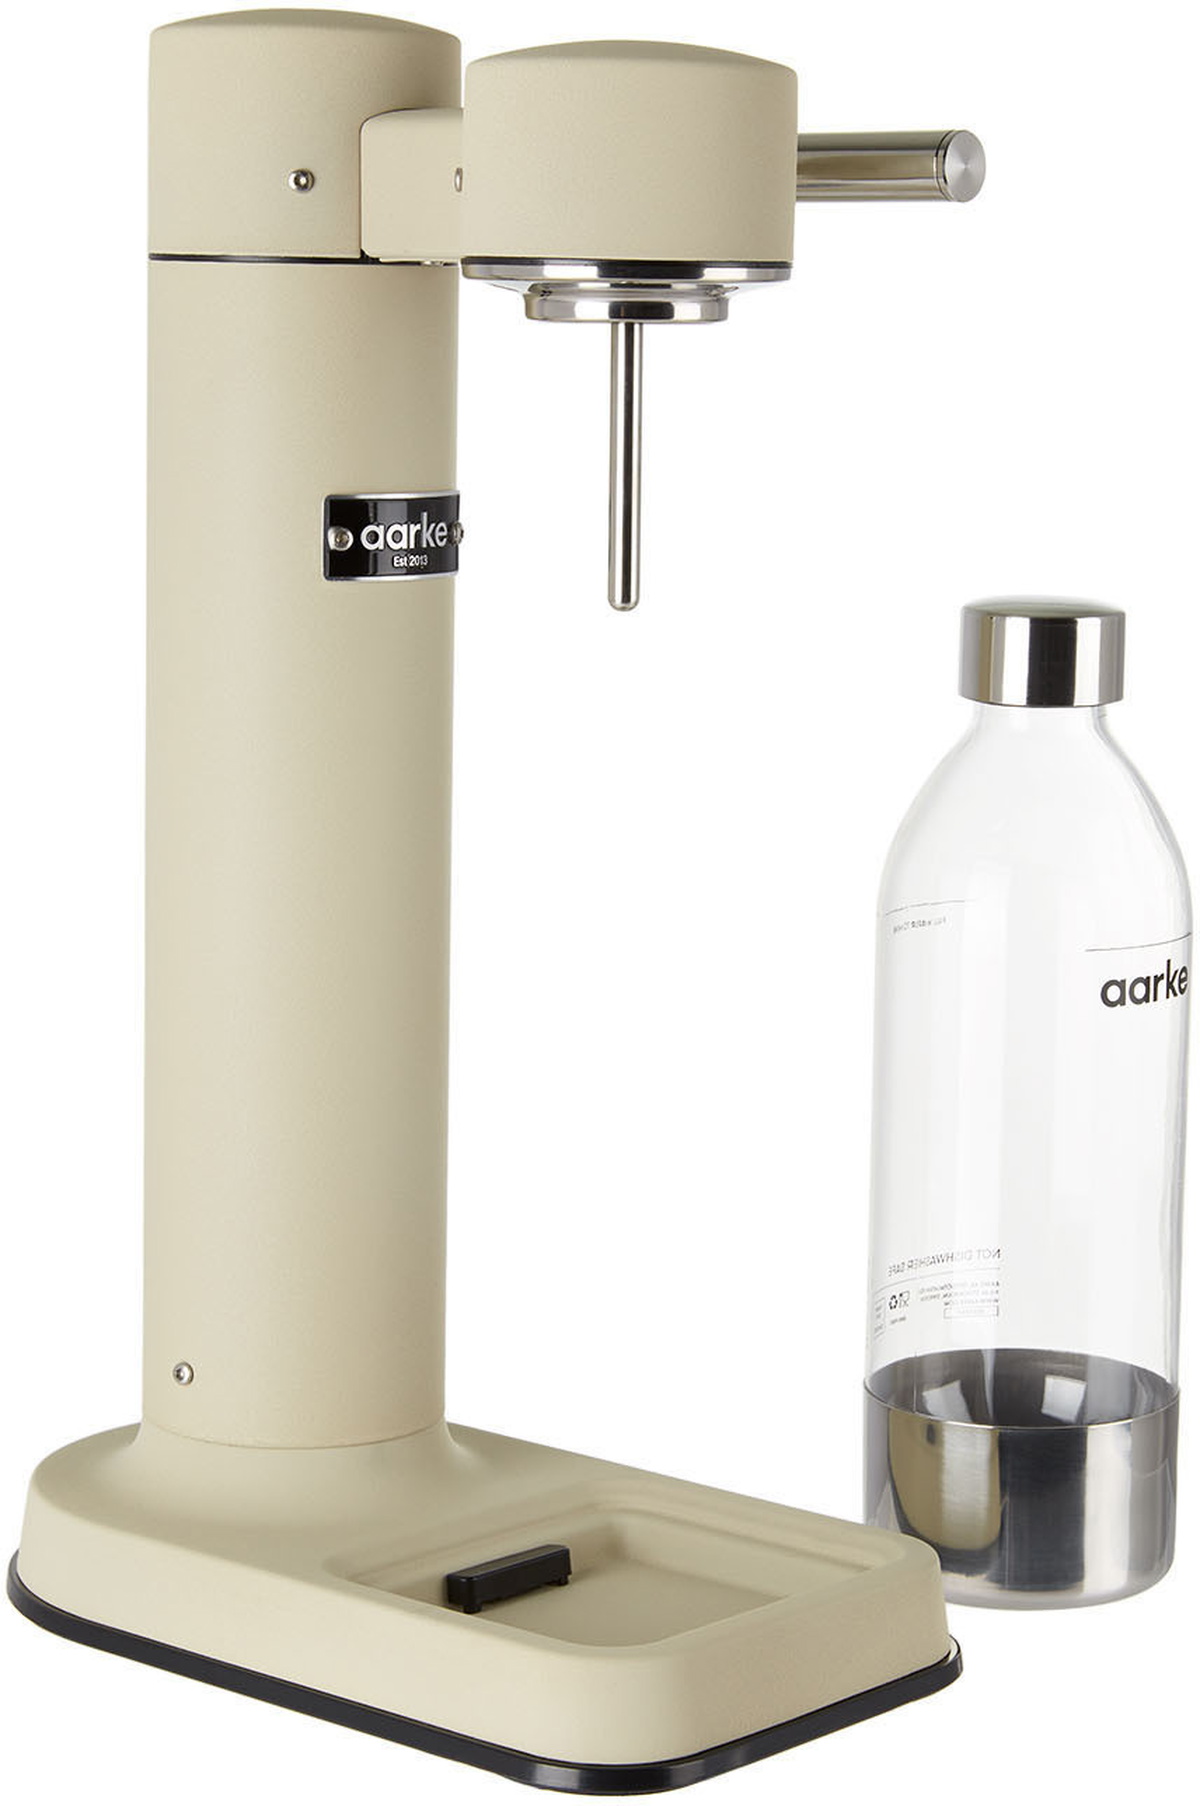 Carbonator Pro with CO2 Cylinder (Sand), Aarke